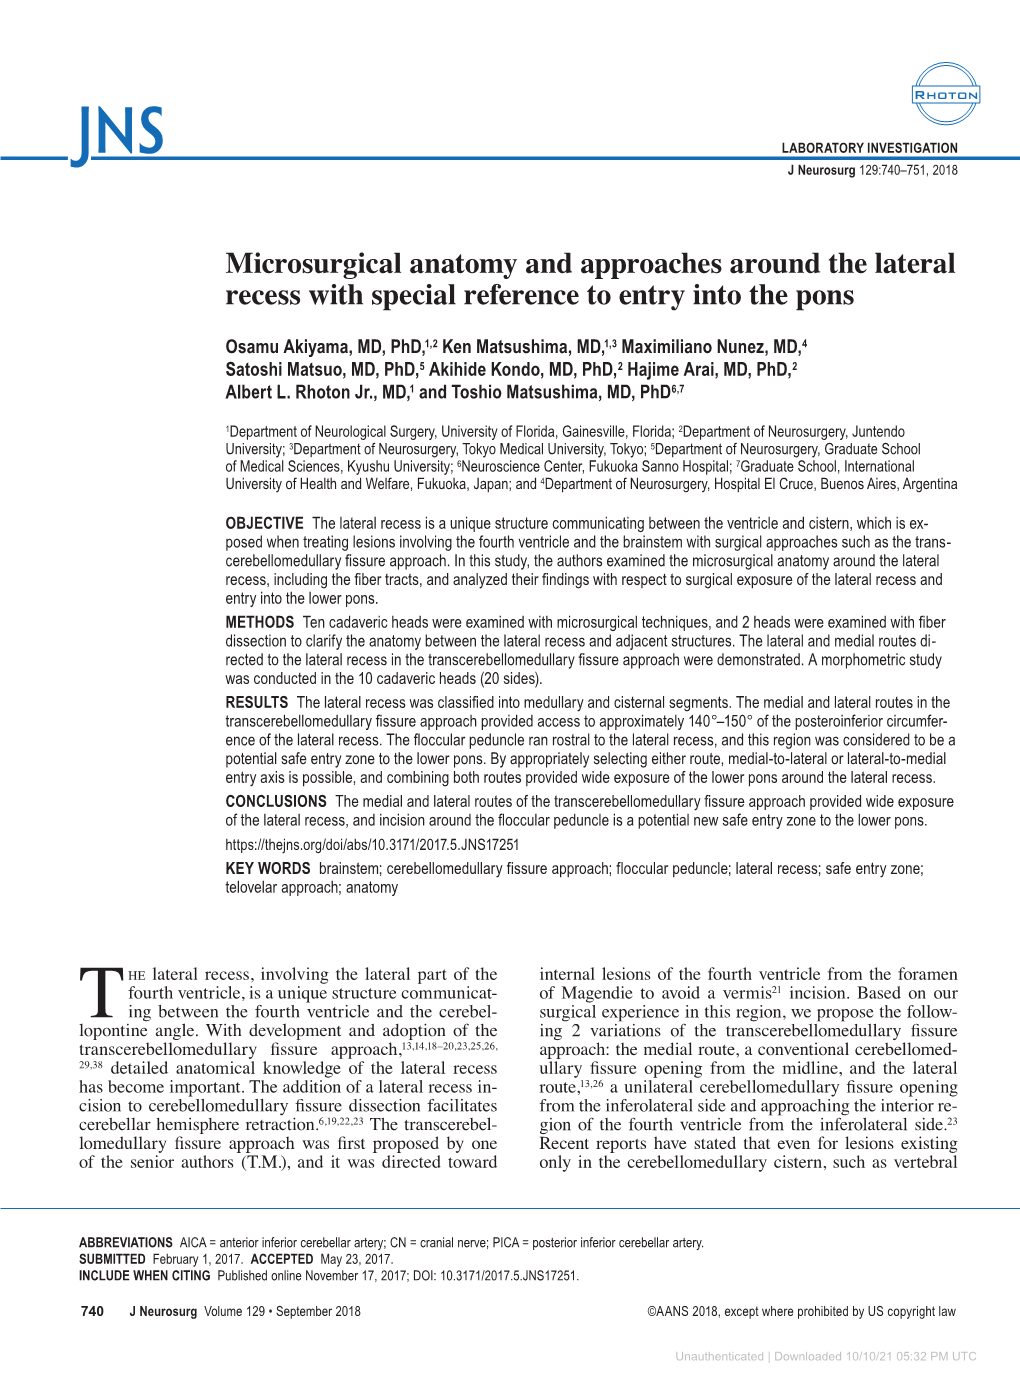 Microsurgical Anatomy and Approaches Around the Lateral Recess with Special Reference to Entry Into the Pons